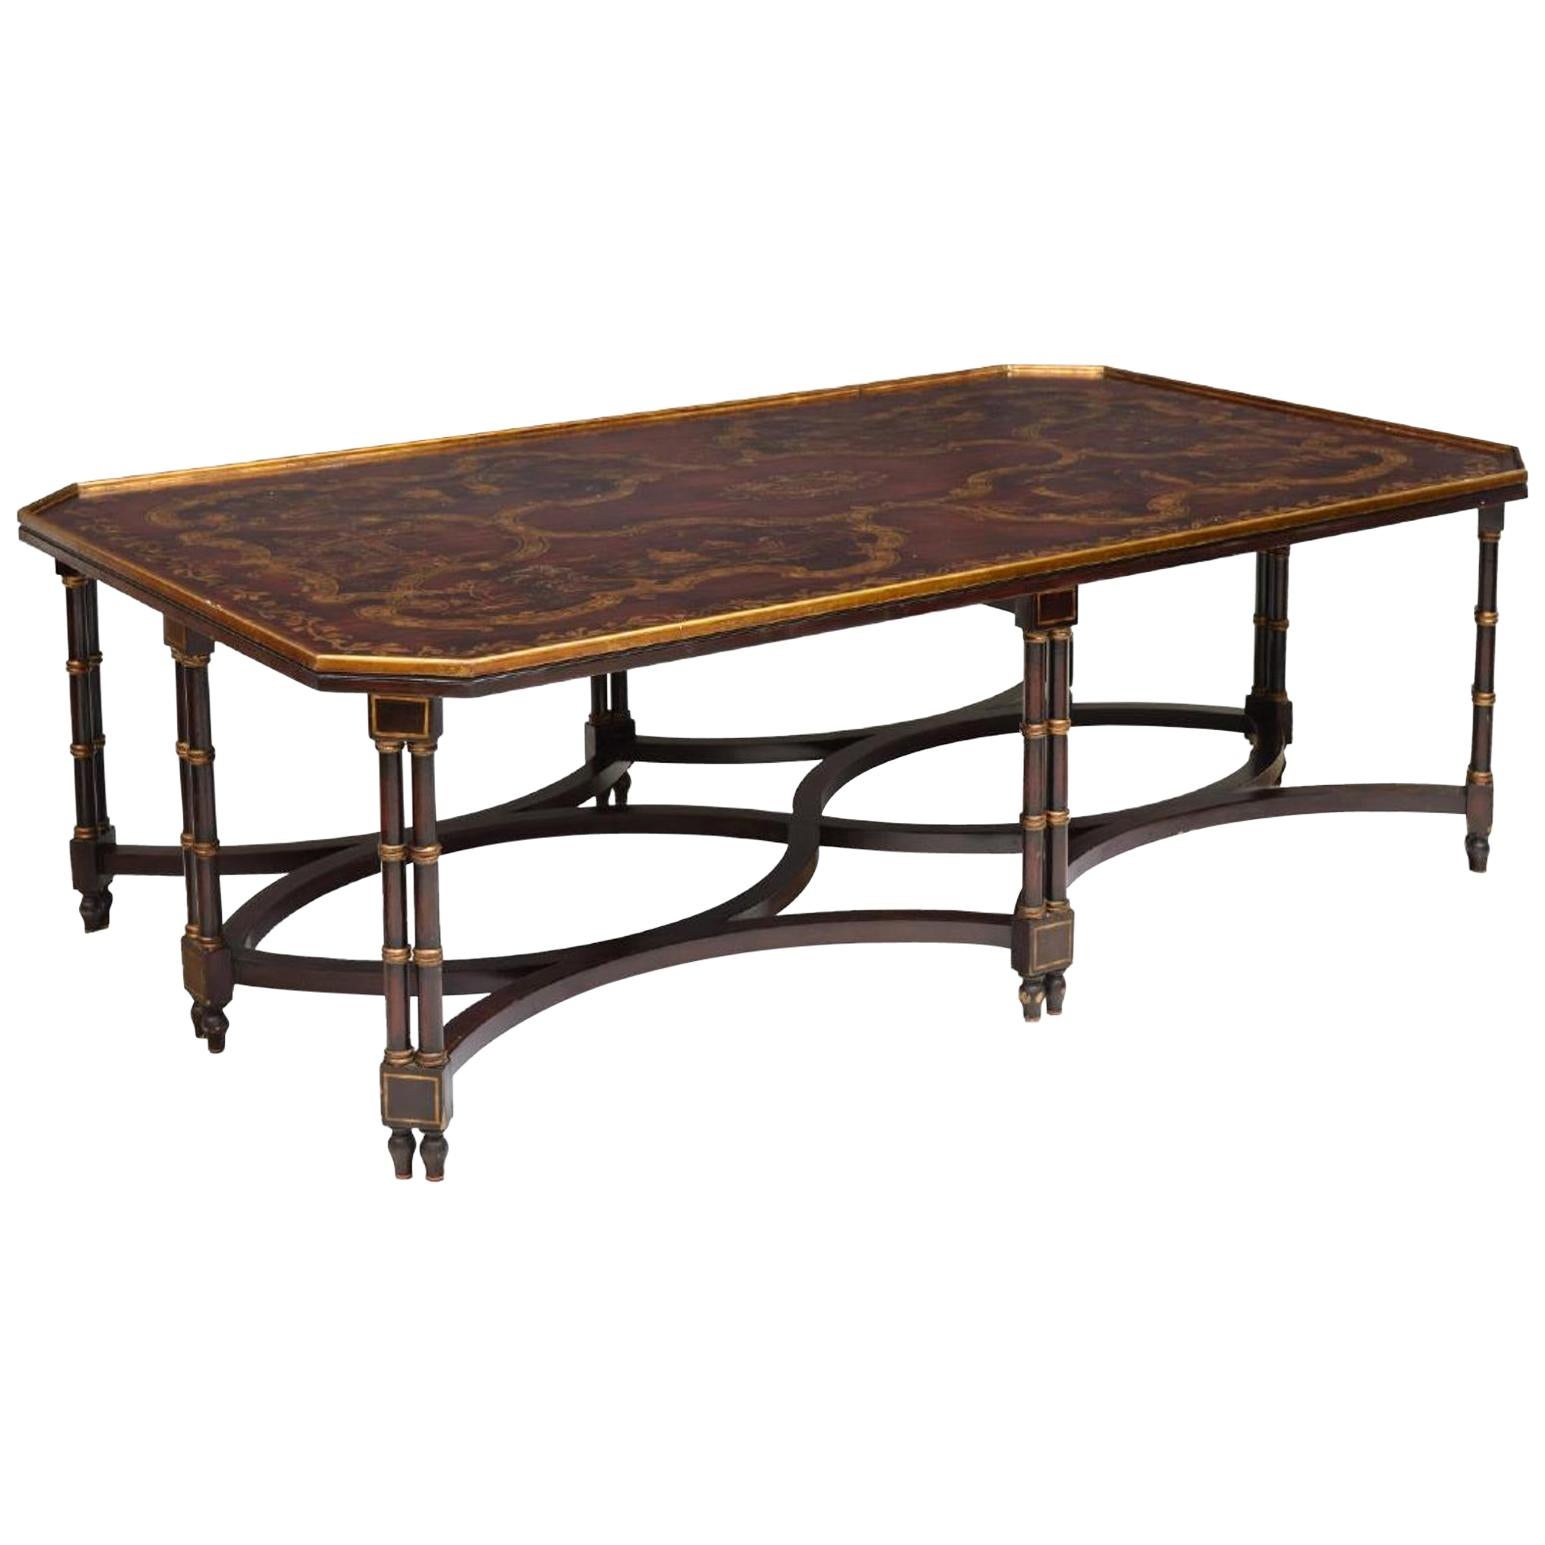 Oversized Chinoiserie Decorated Coffee Table